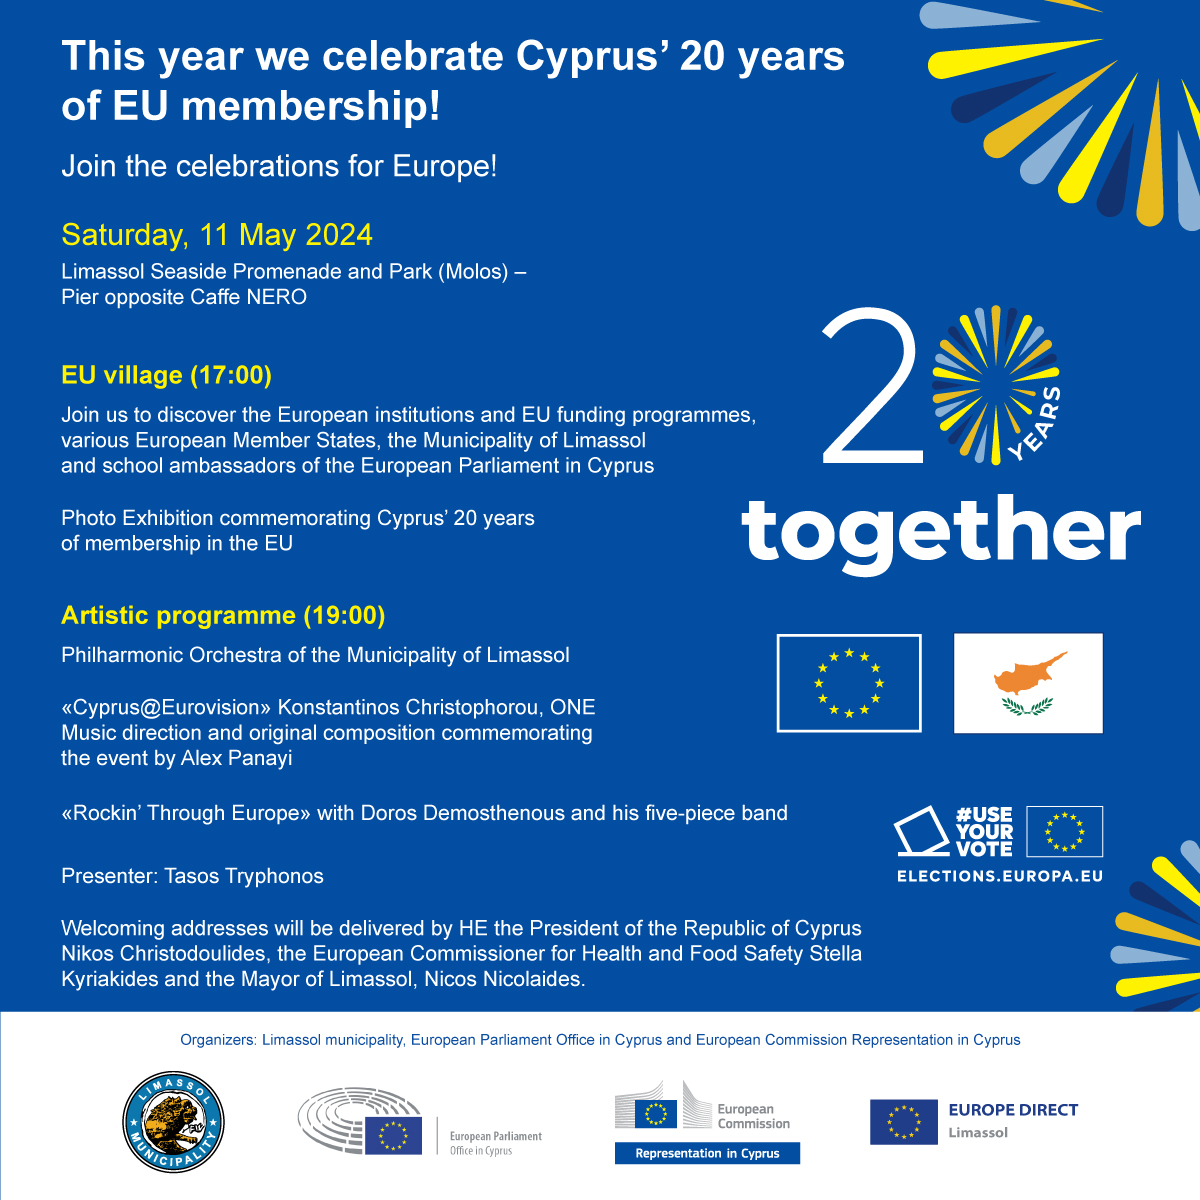 🎉Celebrate #EuropeDay! 🗓️Saturday 11 May 📍Molos Limassol 🔹5pm EU village 🔹7pm: - Philharmonic Orchestra of @DemosLemesou - 'Cyprus@Eurovision' Konstantinos Christophorou, ONE, music direction and original composition by @AlexPanayi - Doros Demosthenous and his band.